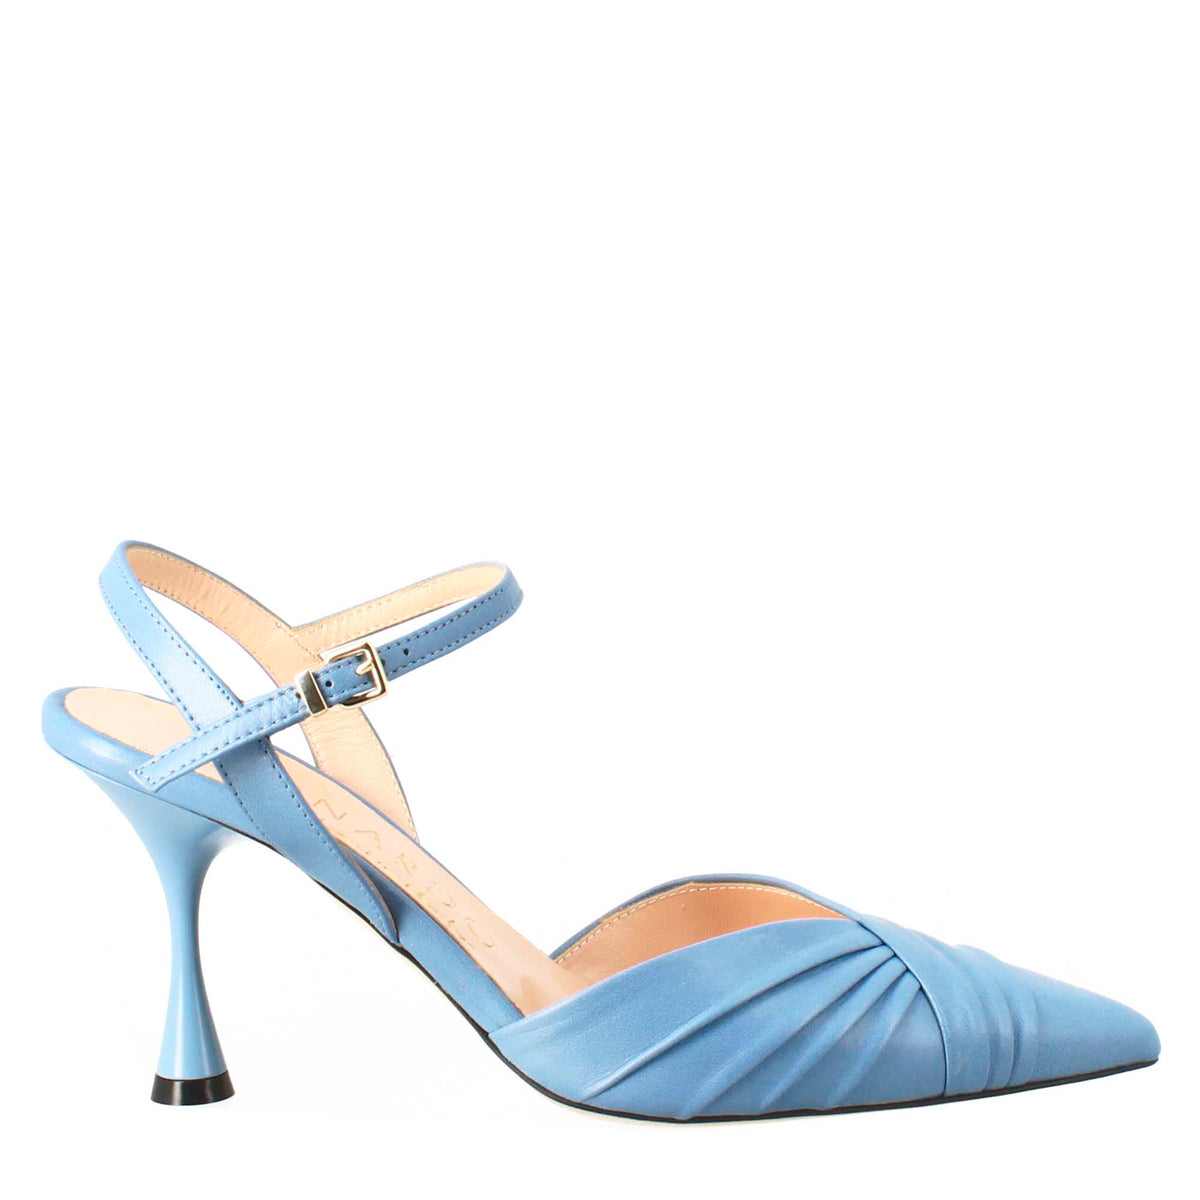 Woman's pointed toe sandal in light blue pleated leather with high heel